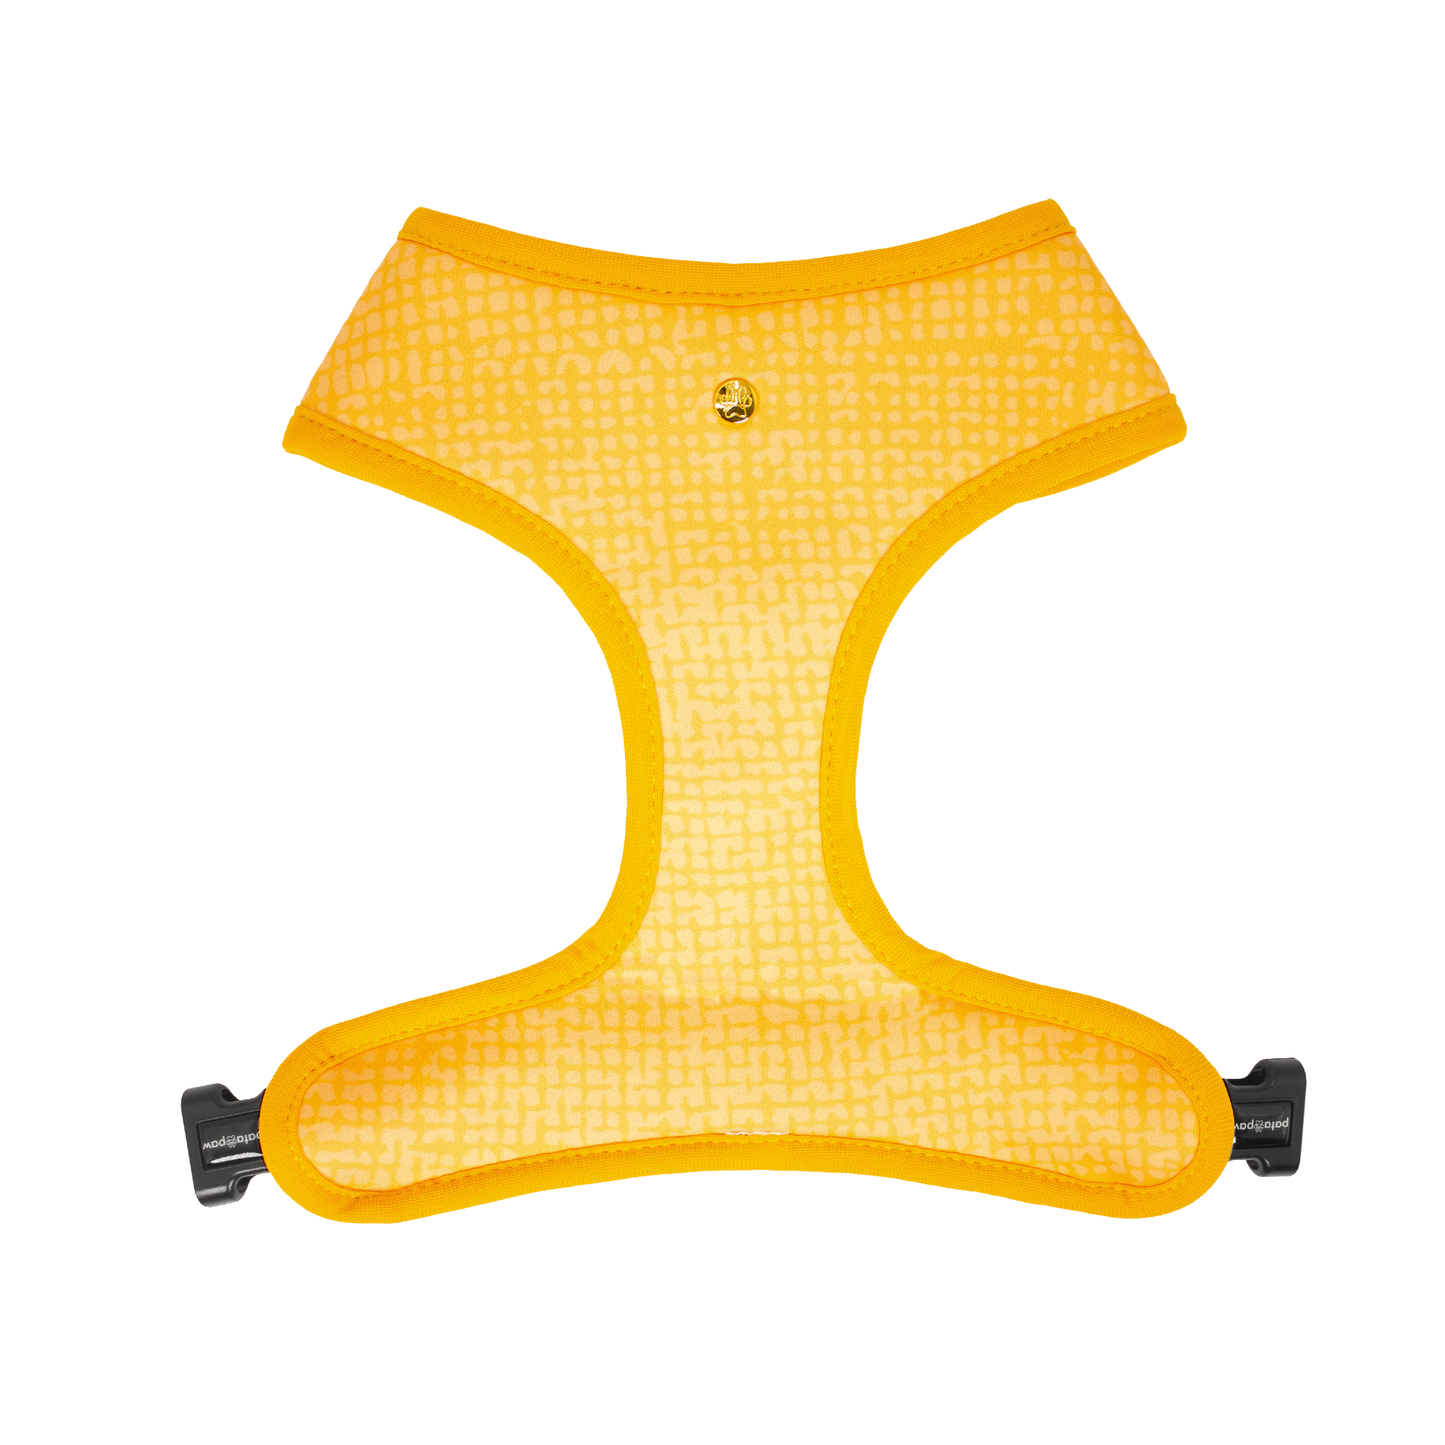 Pata Paw traveling pups  reversible harness showing a timeless and chic texture pattern in dijon yellow.